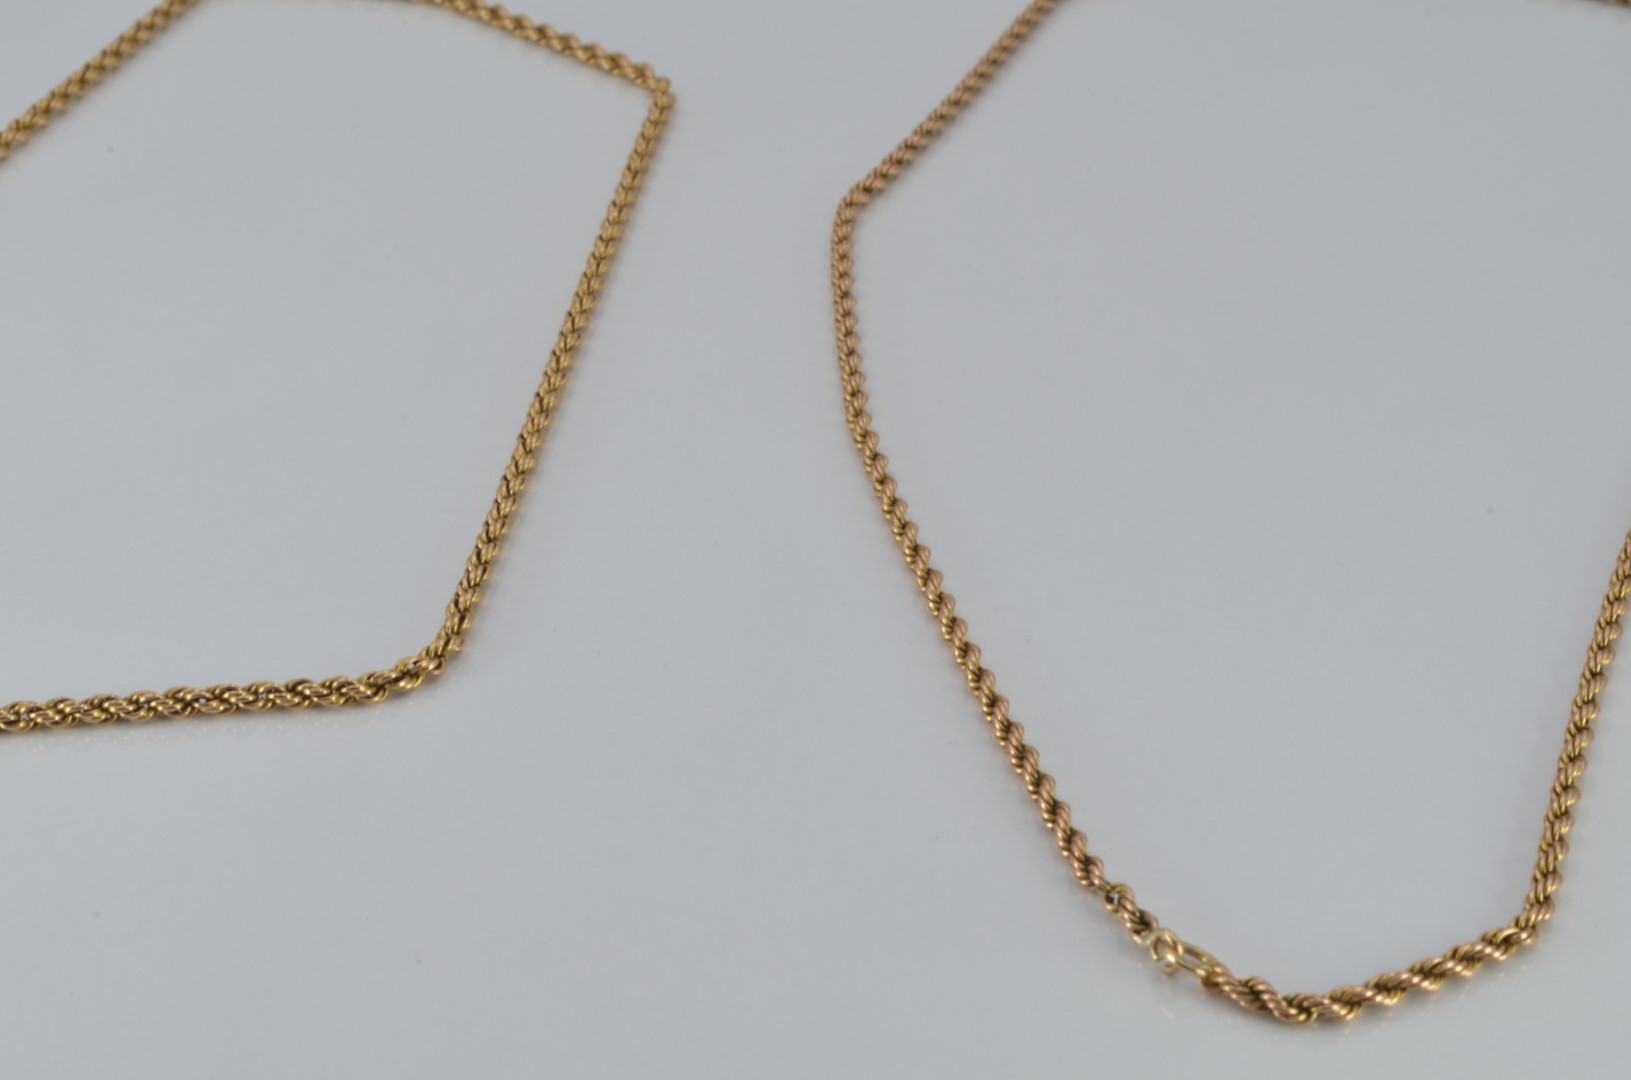 Two 9ct gold rope twist necklaces, 14.1g - Image 2 of 2